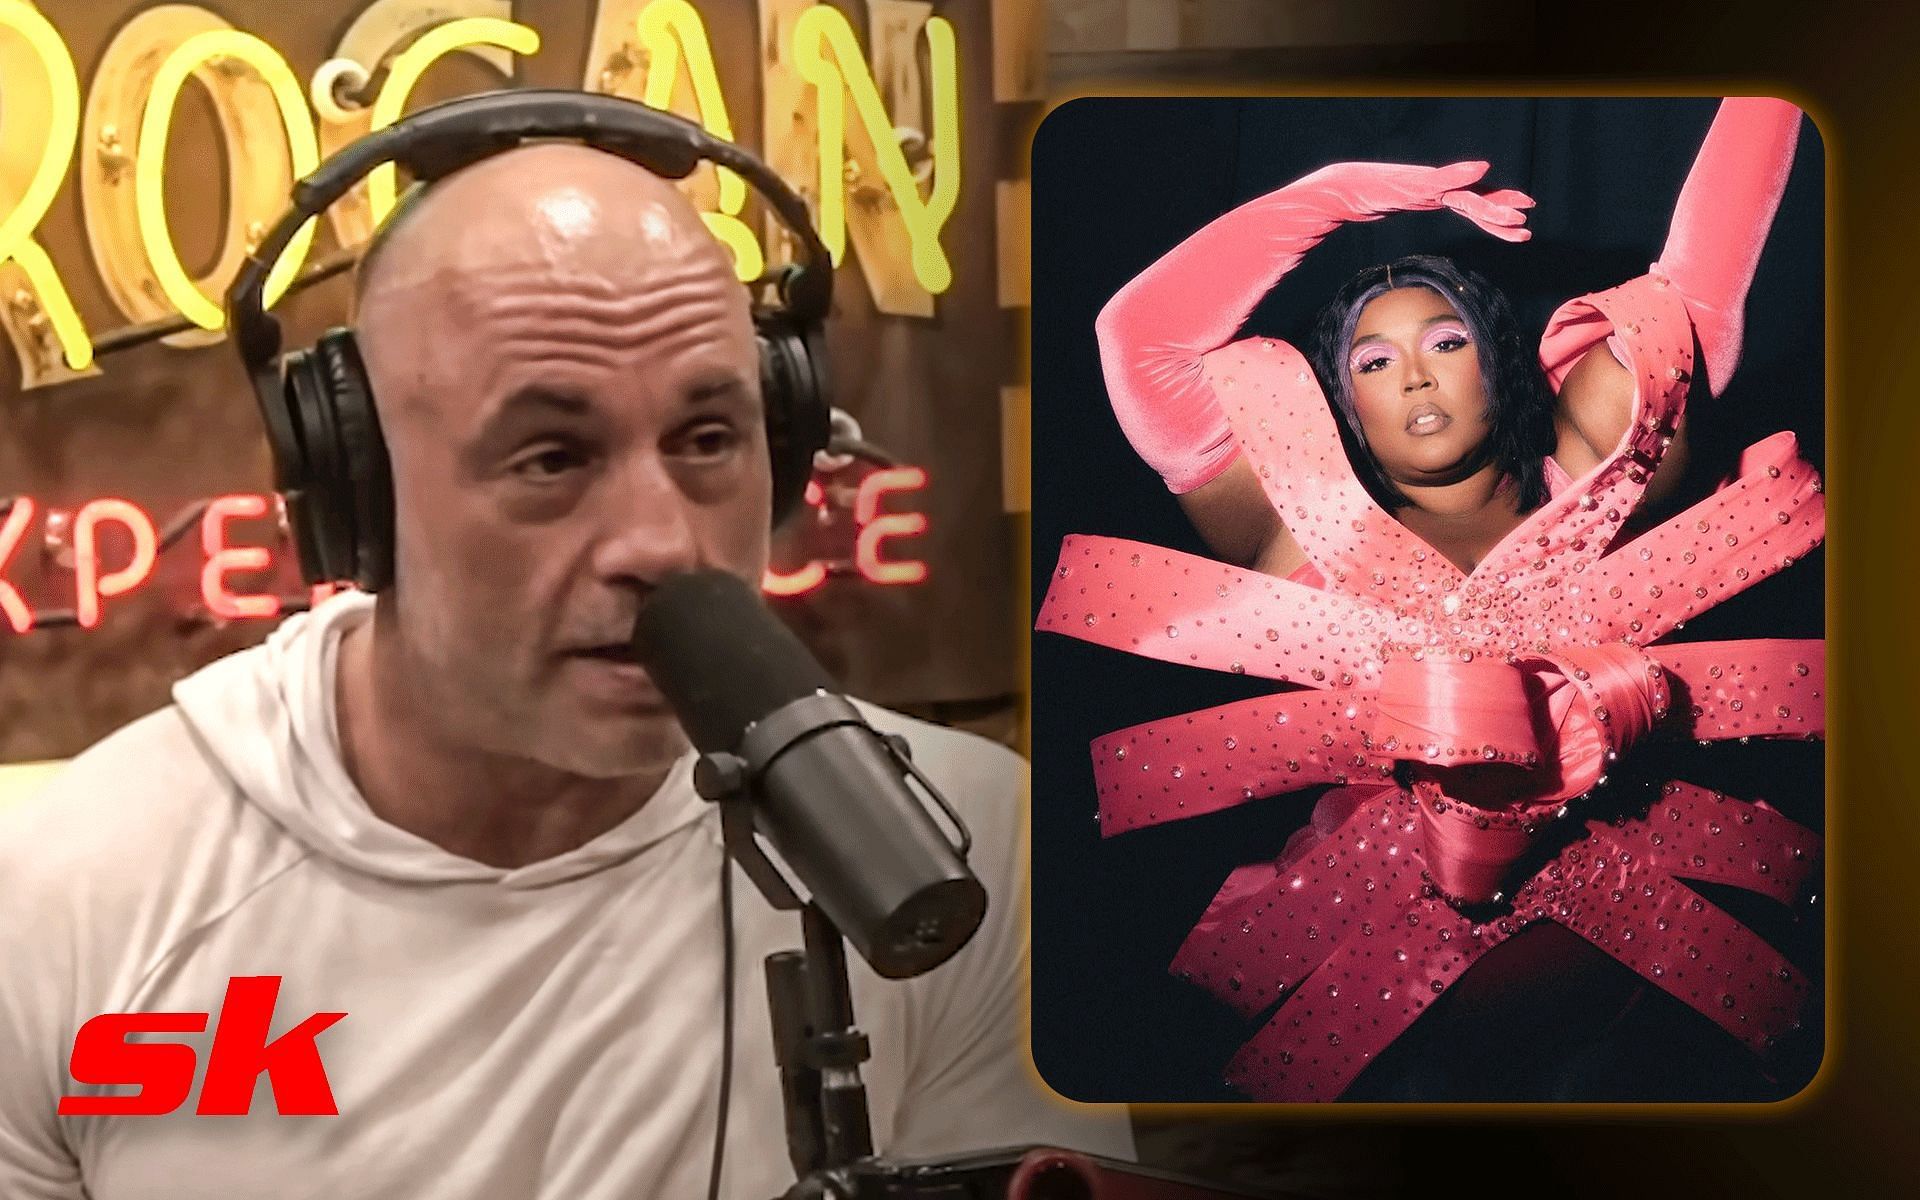 Joe Rogan (Left) and Lizzo (Right) [Images via: PowerfulJRE |YouTube and @lizzobeeating on Instagram]